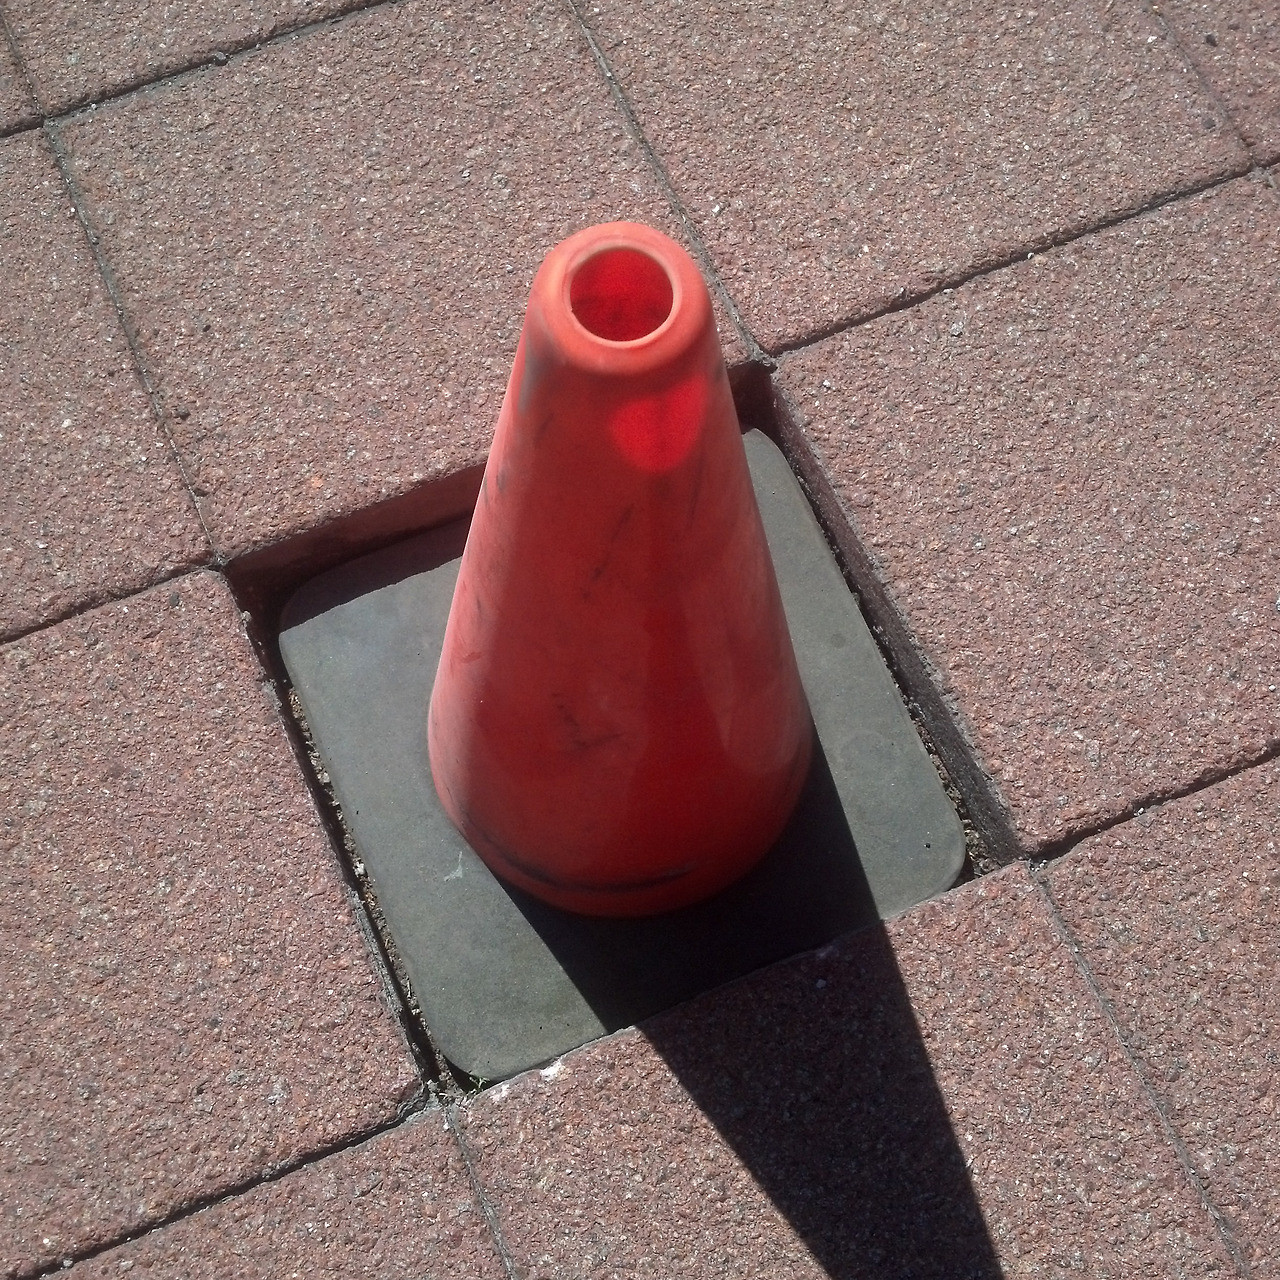 A traffic cone fitting flawlessly into a patio.